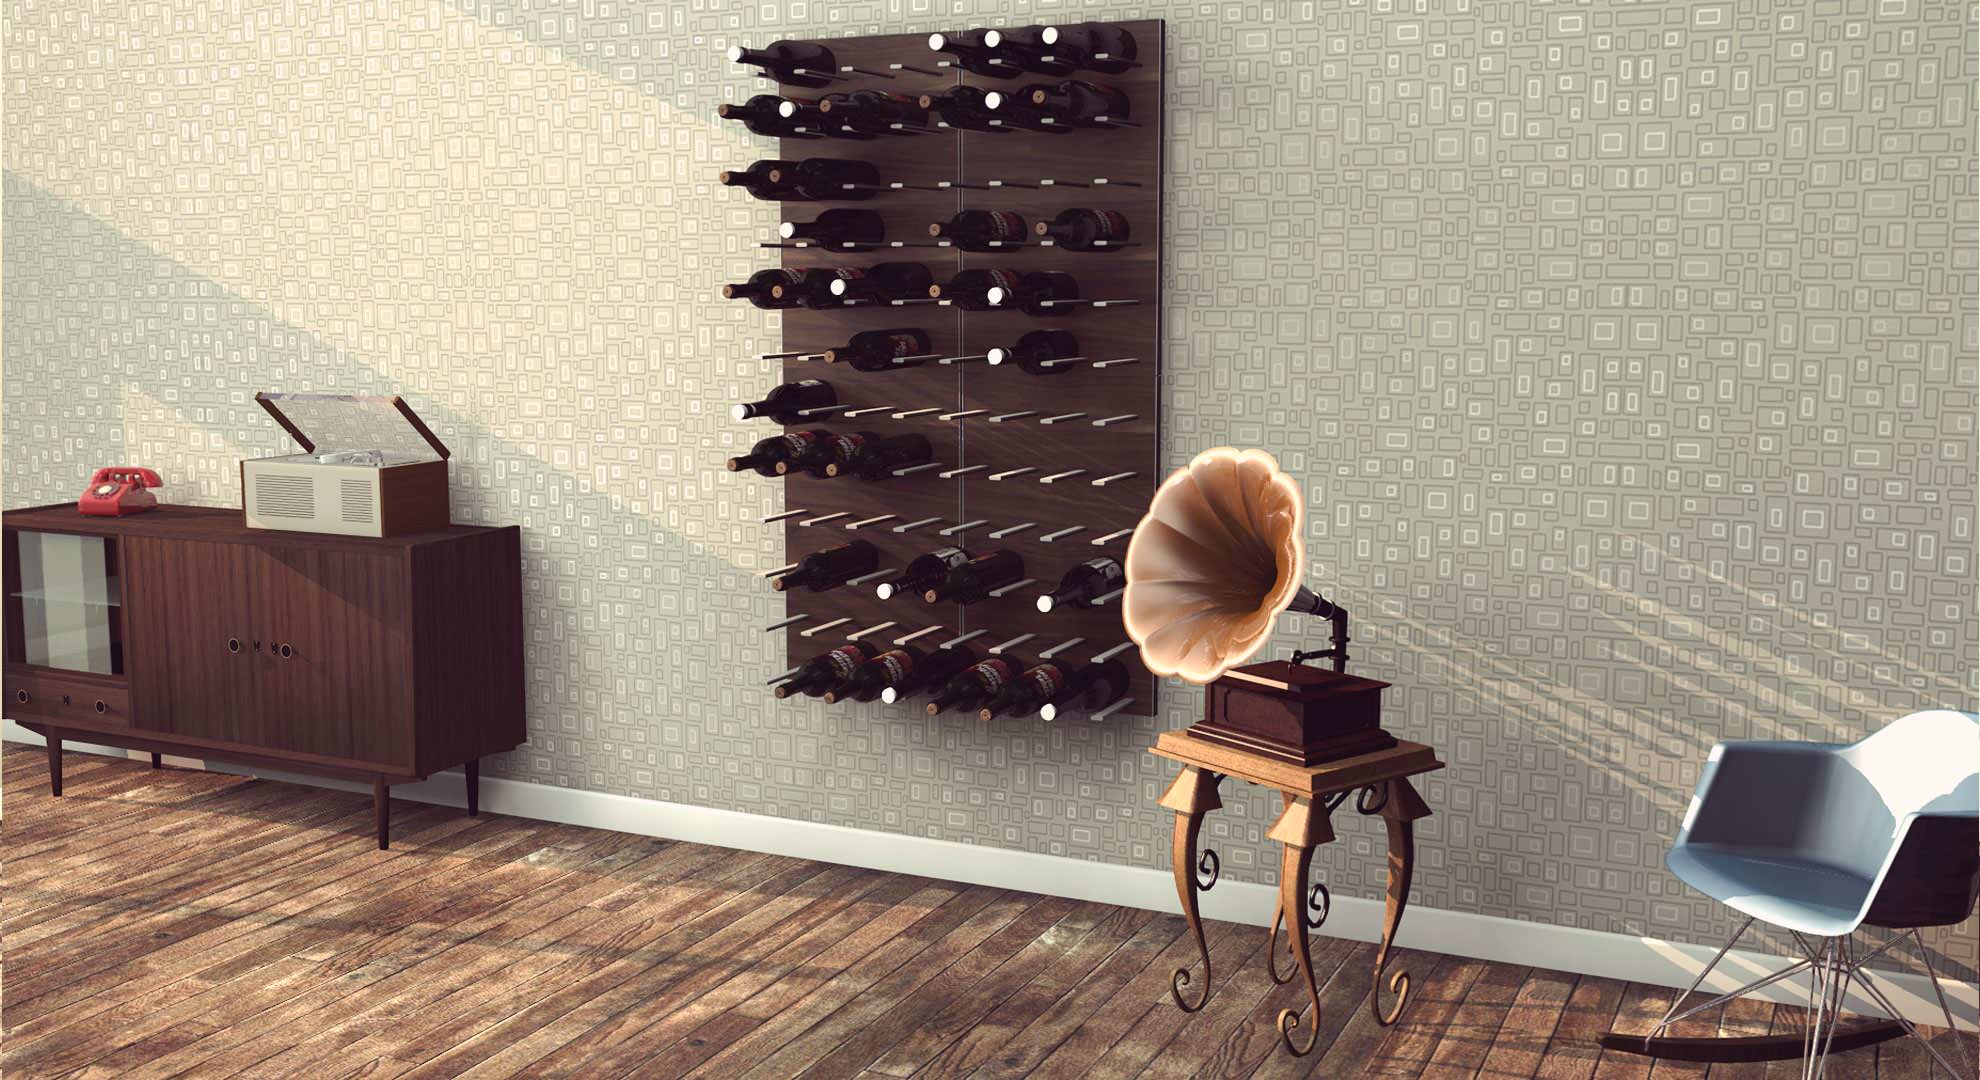 https://st.hzcdn.com/simgs/pictures/living-rooms/stact-modular-wall-mounted-wine-rack-system-designed-by-eric-pfeiffer-stact-wine-displays-inc-img~6c011ba80010bbde_14-0883-1-72cb300.jpg